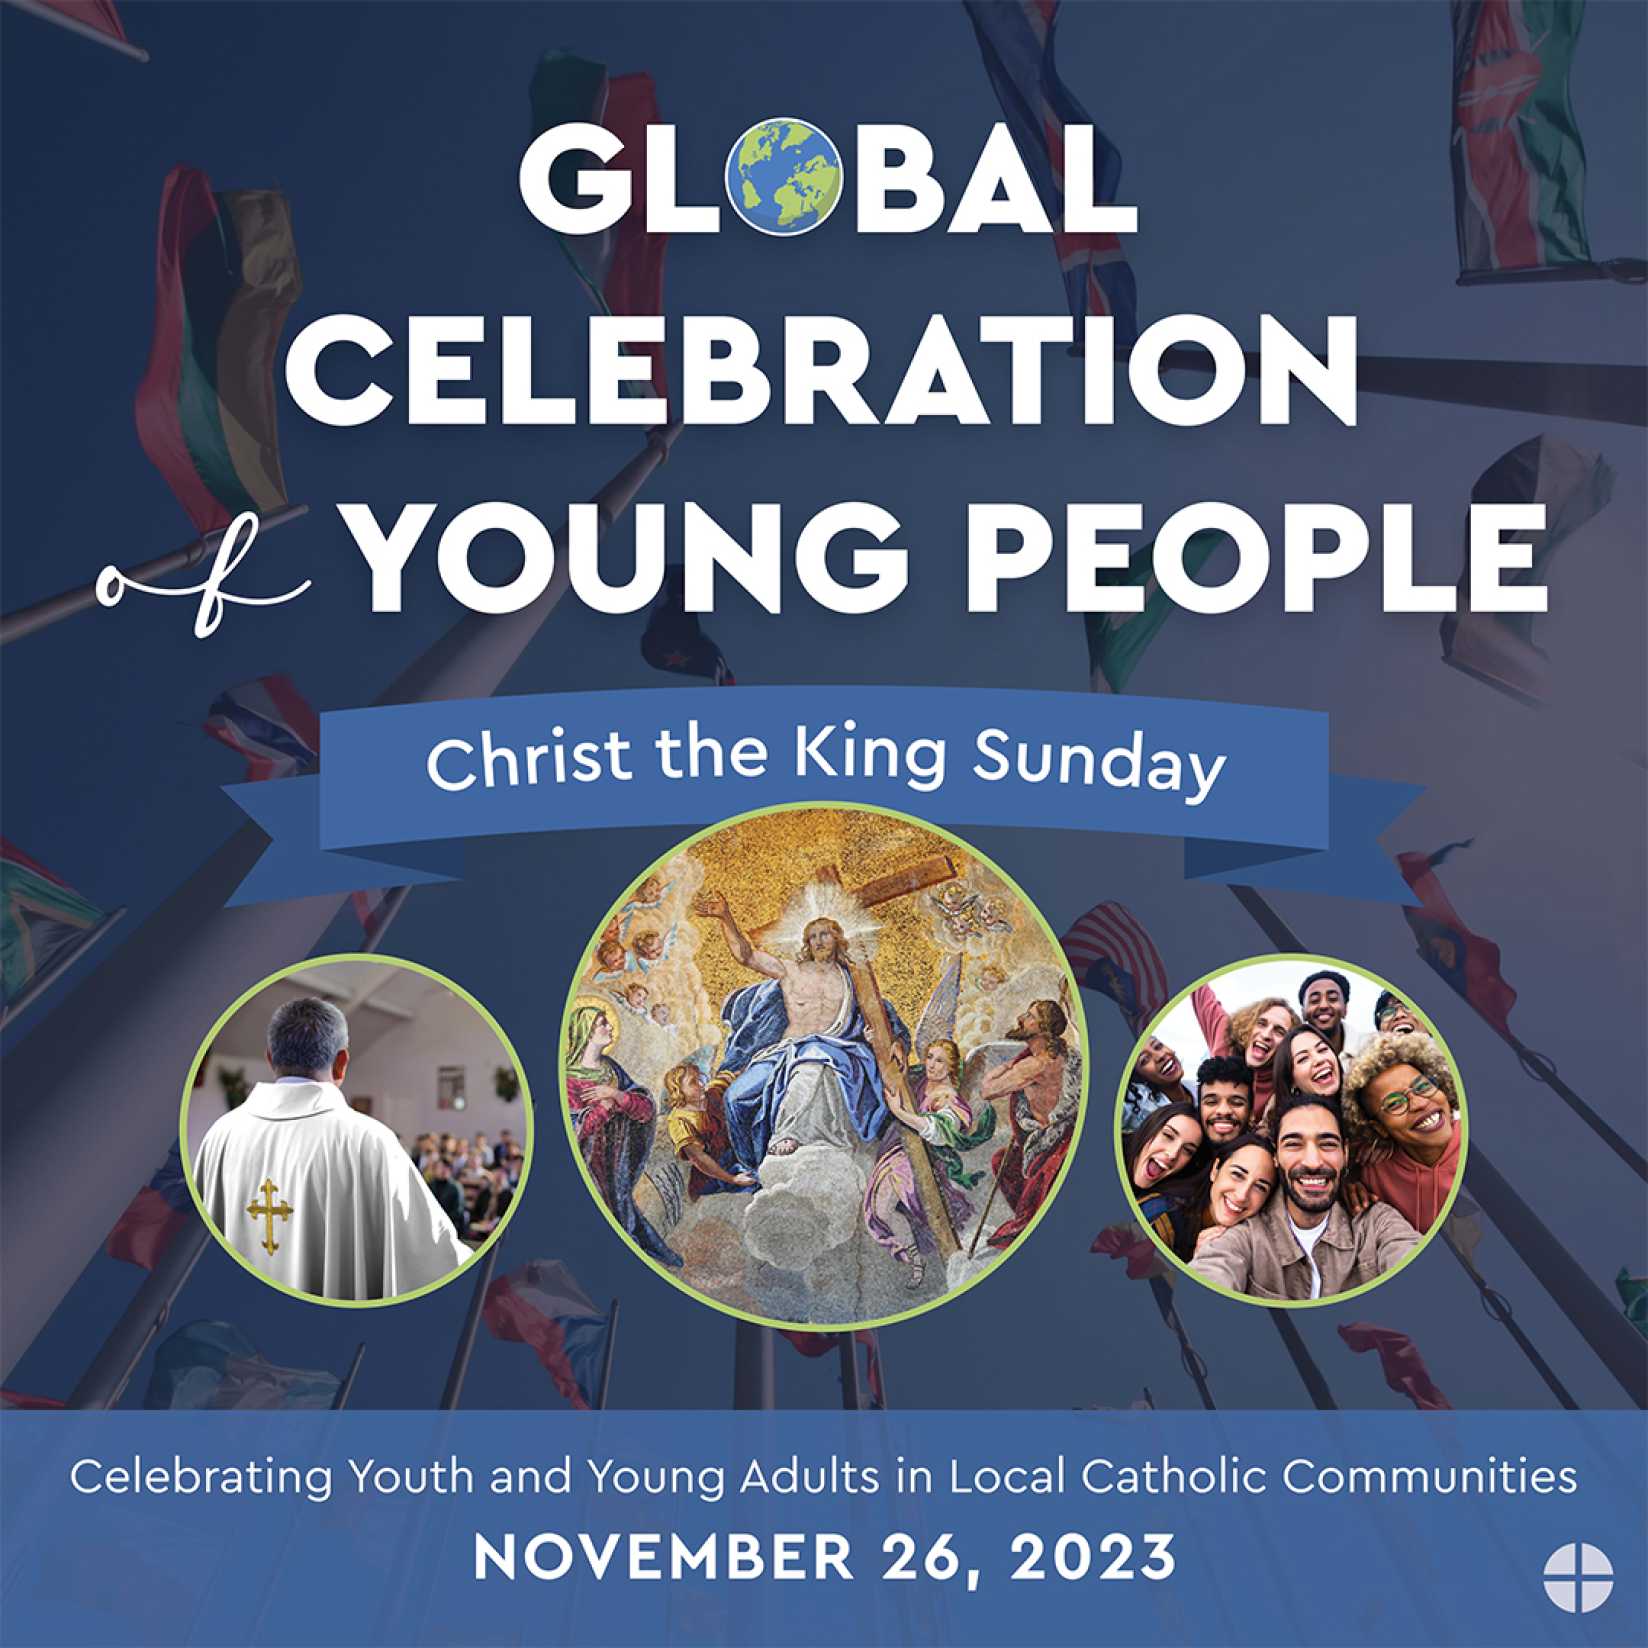 Christ the King Global Celebration of Young People, November 26